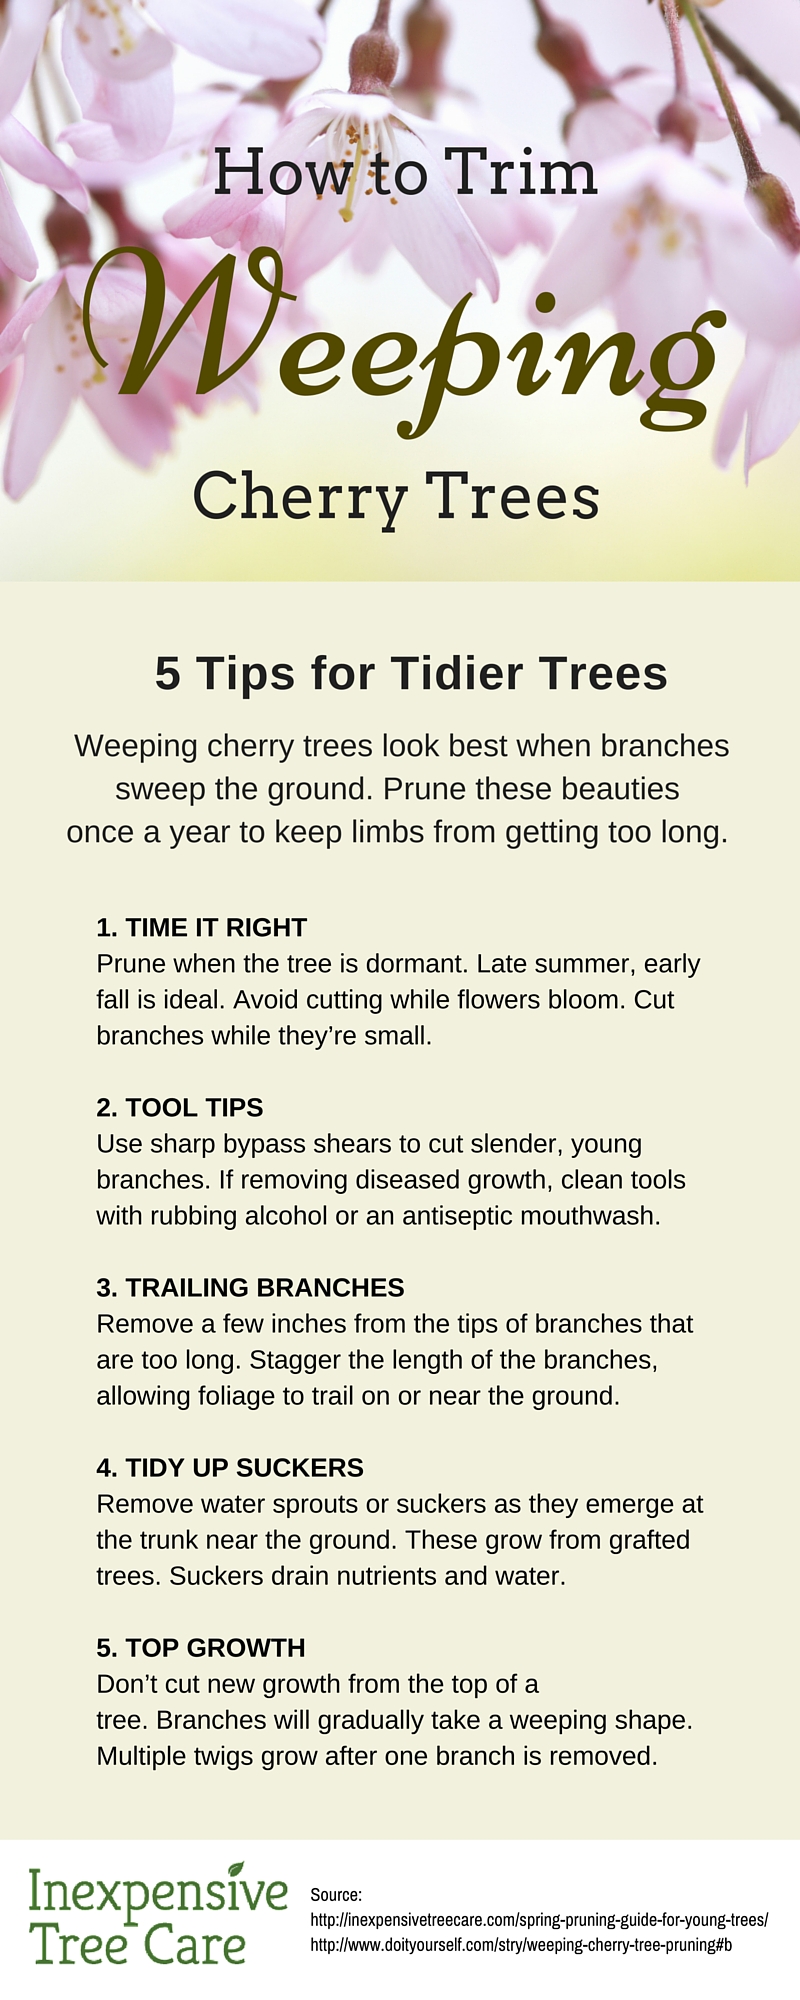 how to trim a weeping cherry tree infographic